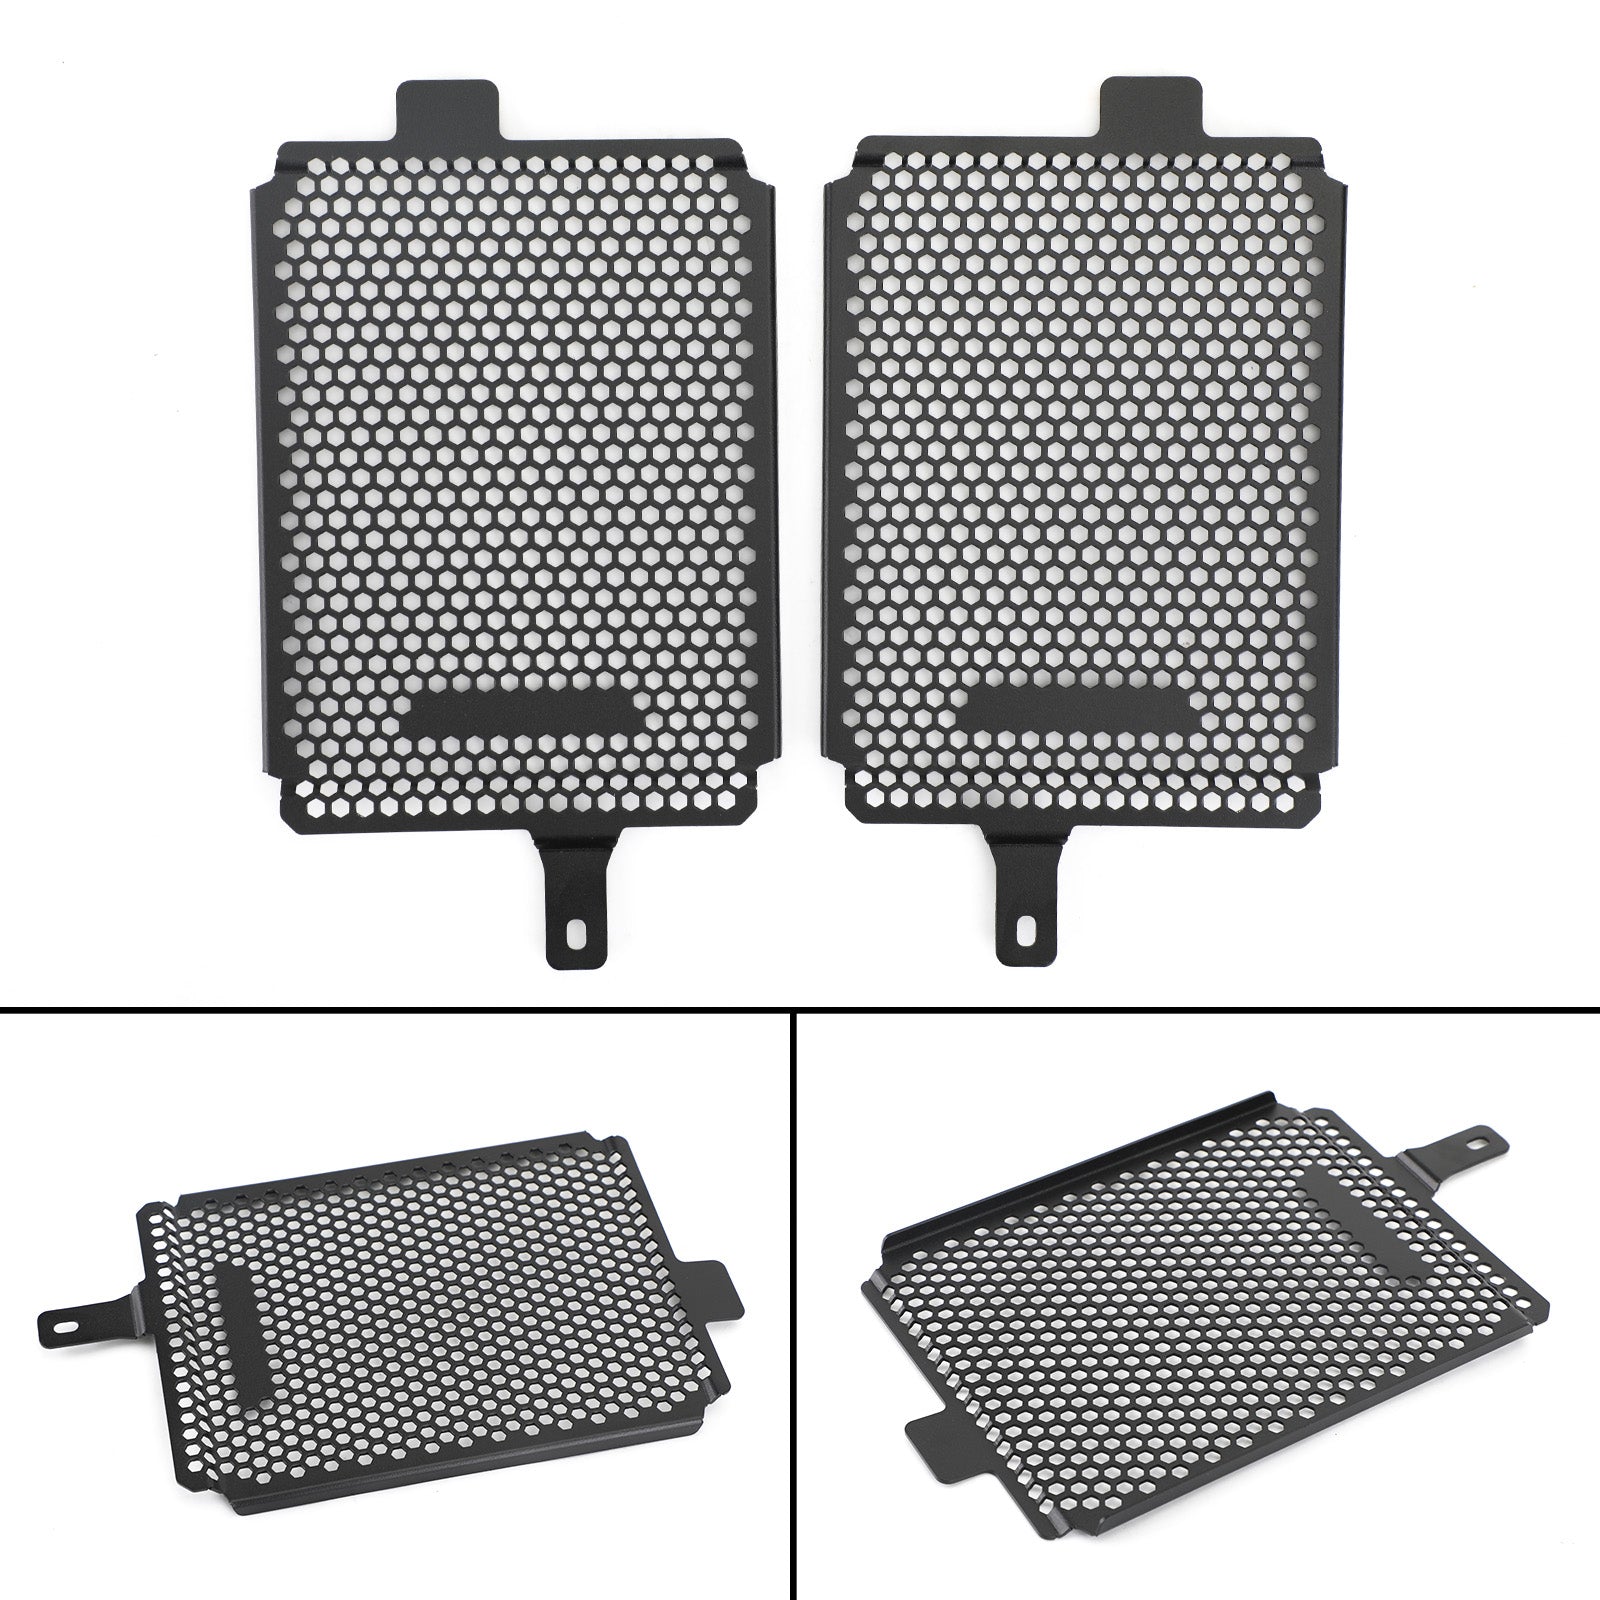 Radiator Guard Cover Protector Fit For Bmw R1250Gs Adventure Rallye Te 19-20